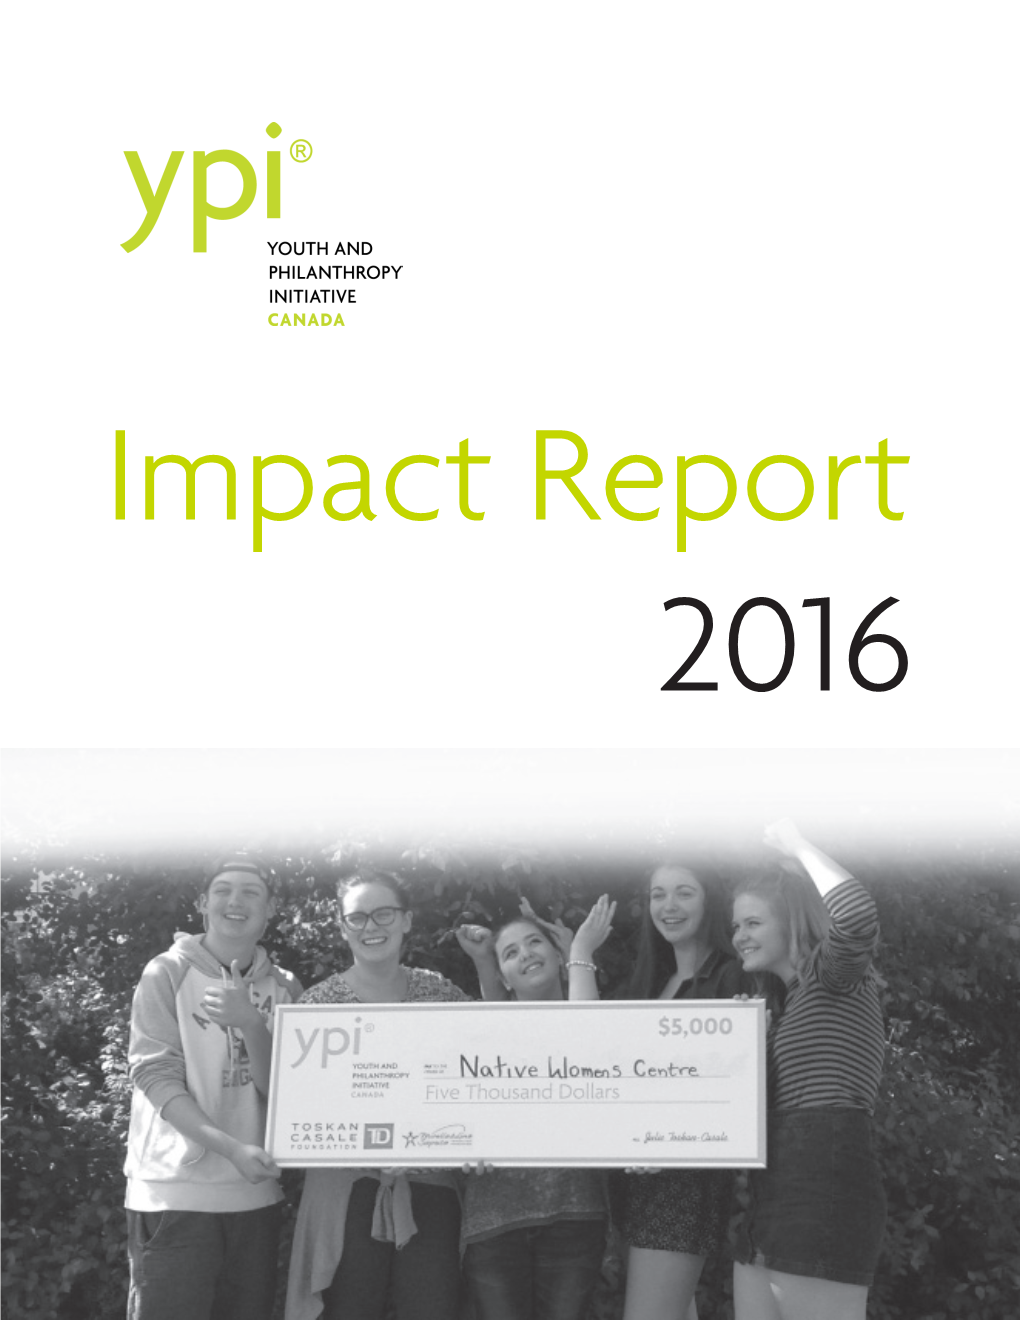 Ypi Canada 2015/16 Participating Schools and Winning Charities